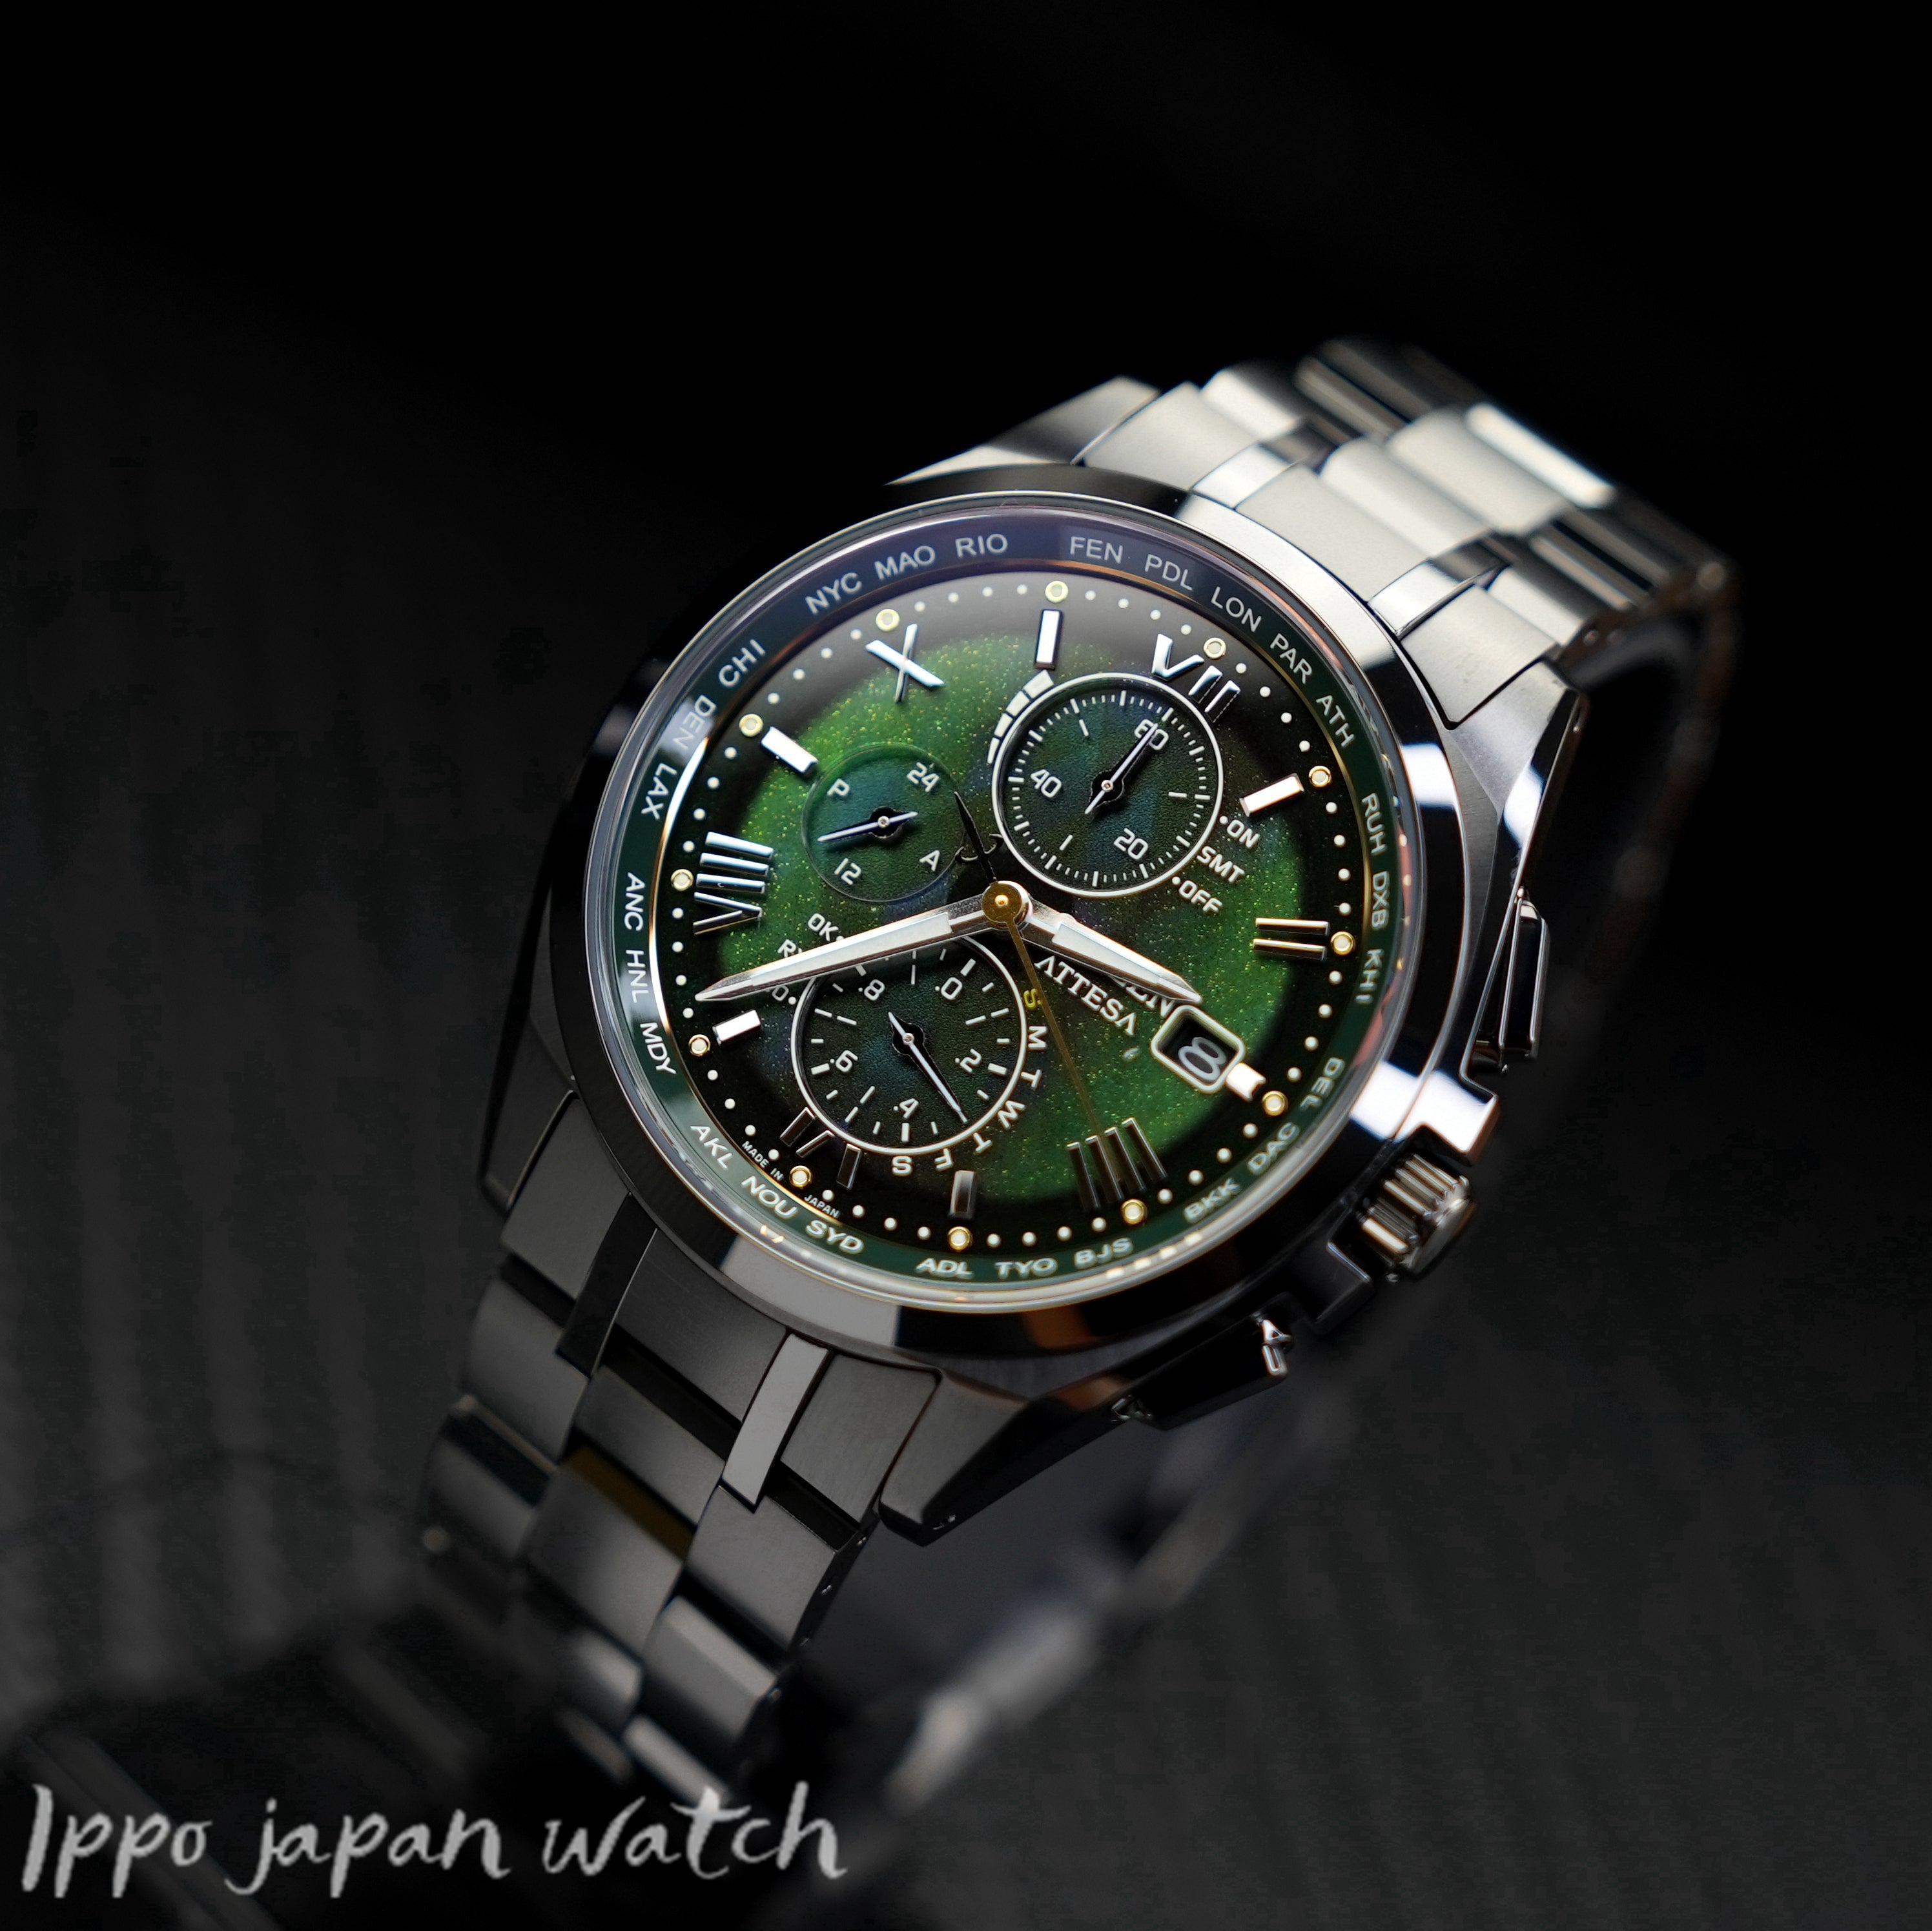 CITIZEN attesa AT8049-61W Photovoltaic eco-drive super titanium watch 2022.9.8 released - IPPO JAPAN WATCH 